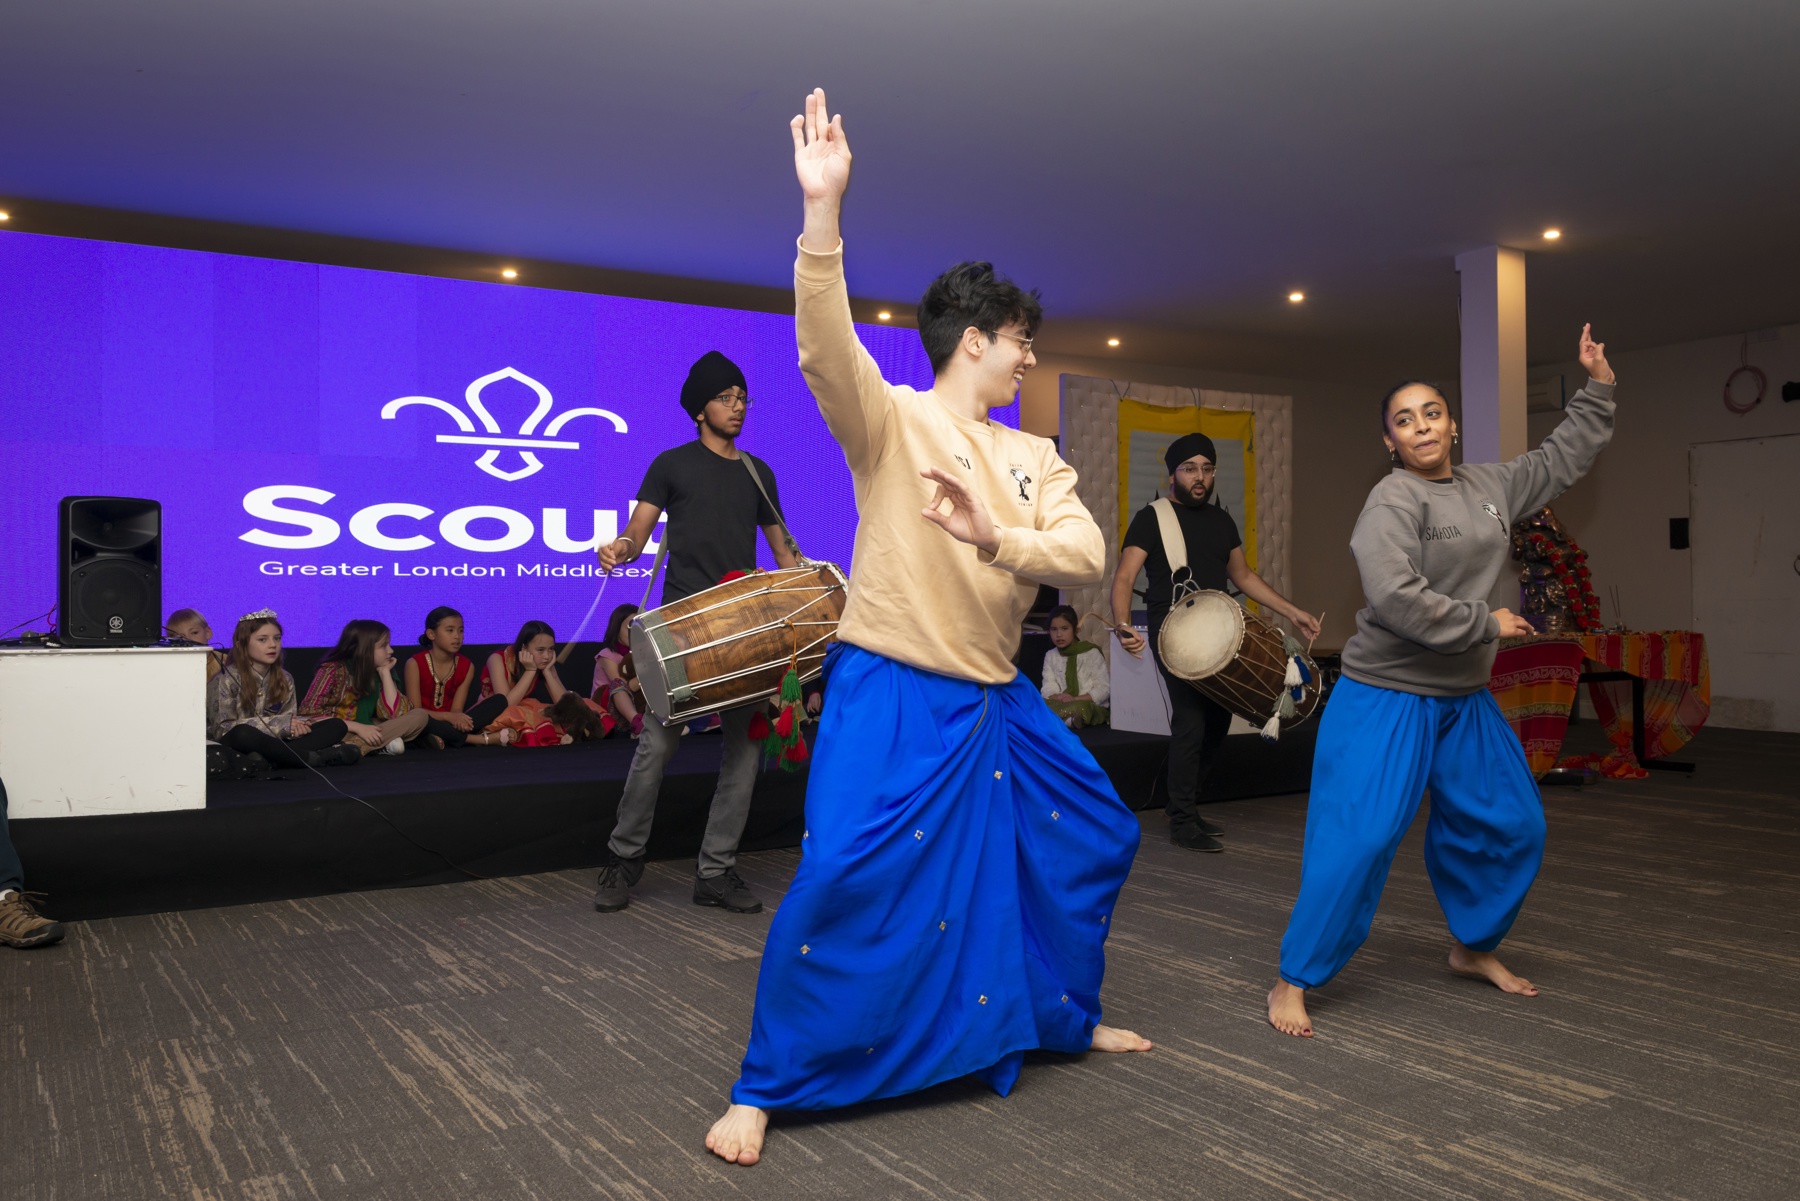 Two Scouts perform Bhangra dancing, in front of two other Scouts drumming. The dancers look at each other with their arms reaching out, wearing traditional Diwali clothing